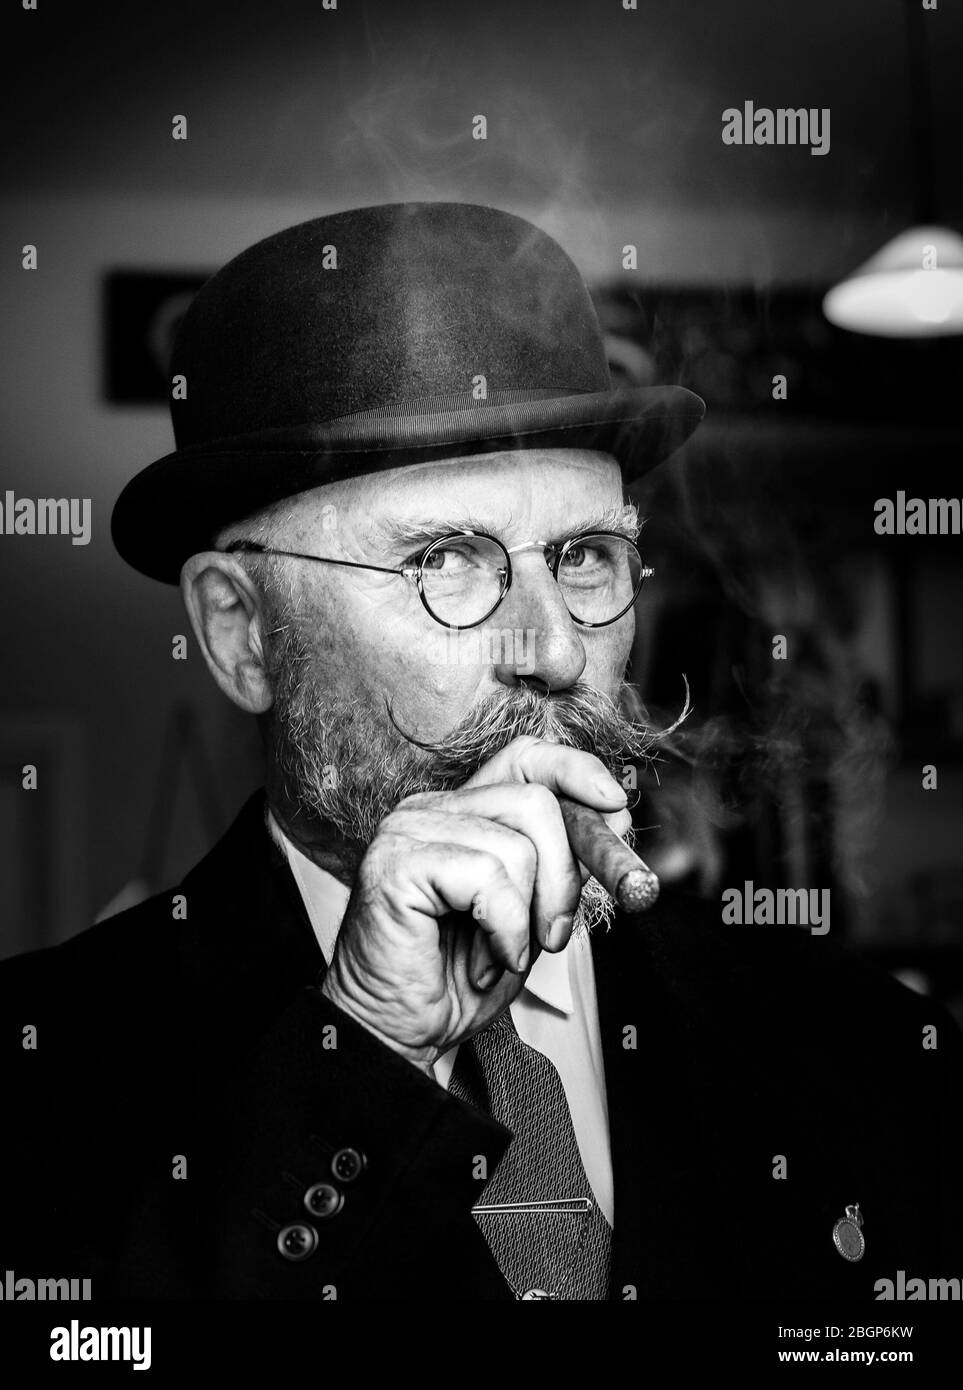 Monochrome front close-up portrait of 1940s British man with handlebar moustache & bowler hat smoking cigar, 1940s UK summer event. Stock Photo